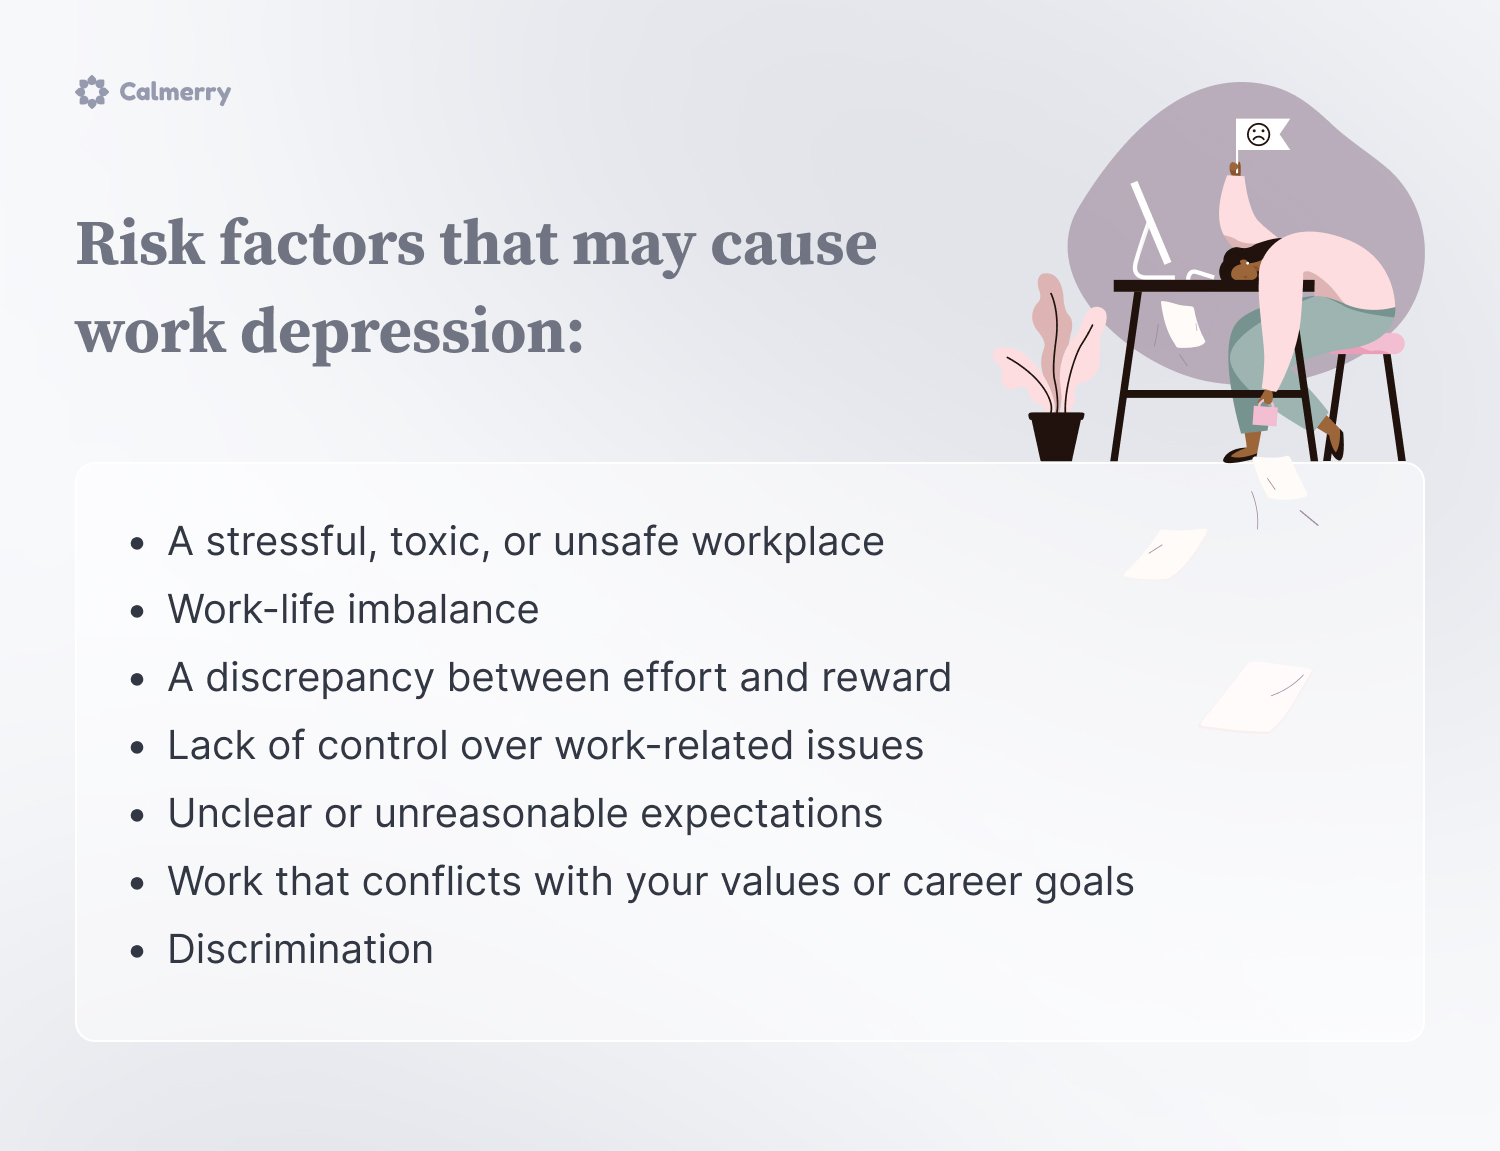 Risk factors that may cause work depression:
A stressful, toxic, or unsafe workplace 
Work-life imbalance
A discrepancy between effort and reward 
Lack of control over work-related issues
Unclear or unreasonable expectations 
Work that conflicts with your values or career goals
Discrimination